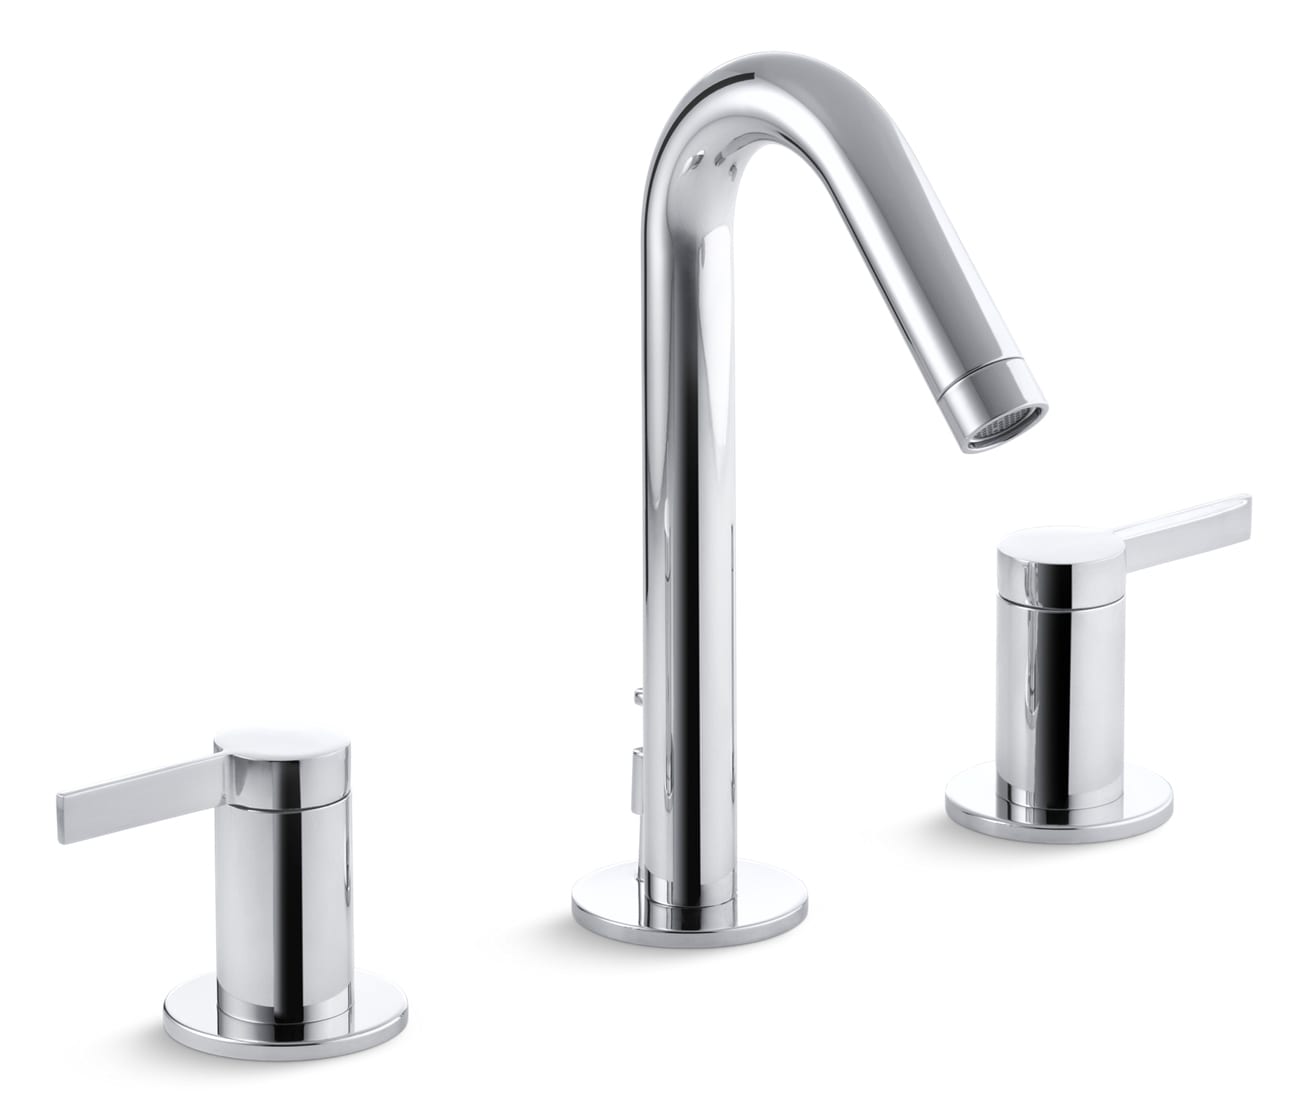 Kohler K 942 4 Cp Polished Chrome Stillness Widespread Bathroom Faucet With Ultra Glide Valve Technology Free Metal Pop Up Drain Assembly Purchase Faucetdirect Com - How To Tighten A Kohler Bathroom Faucet Base